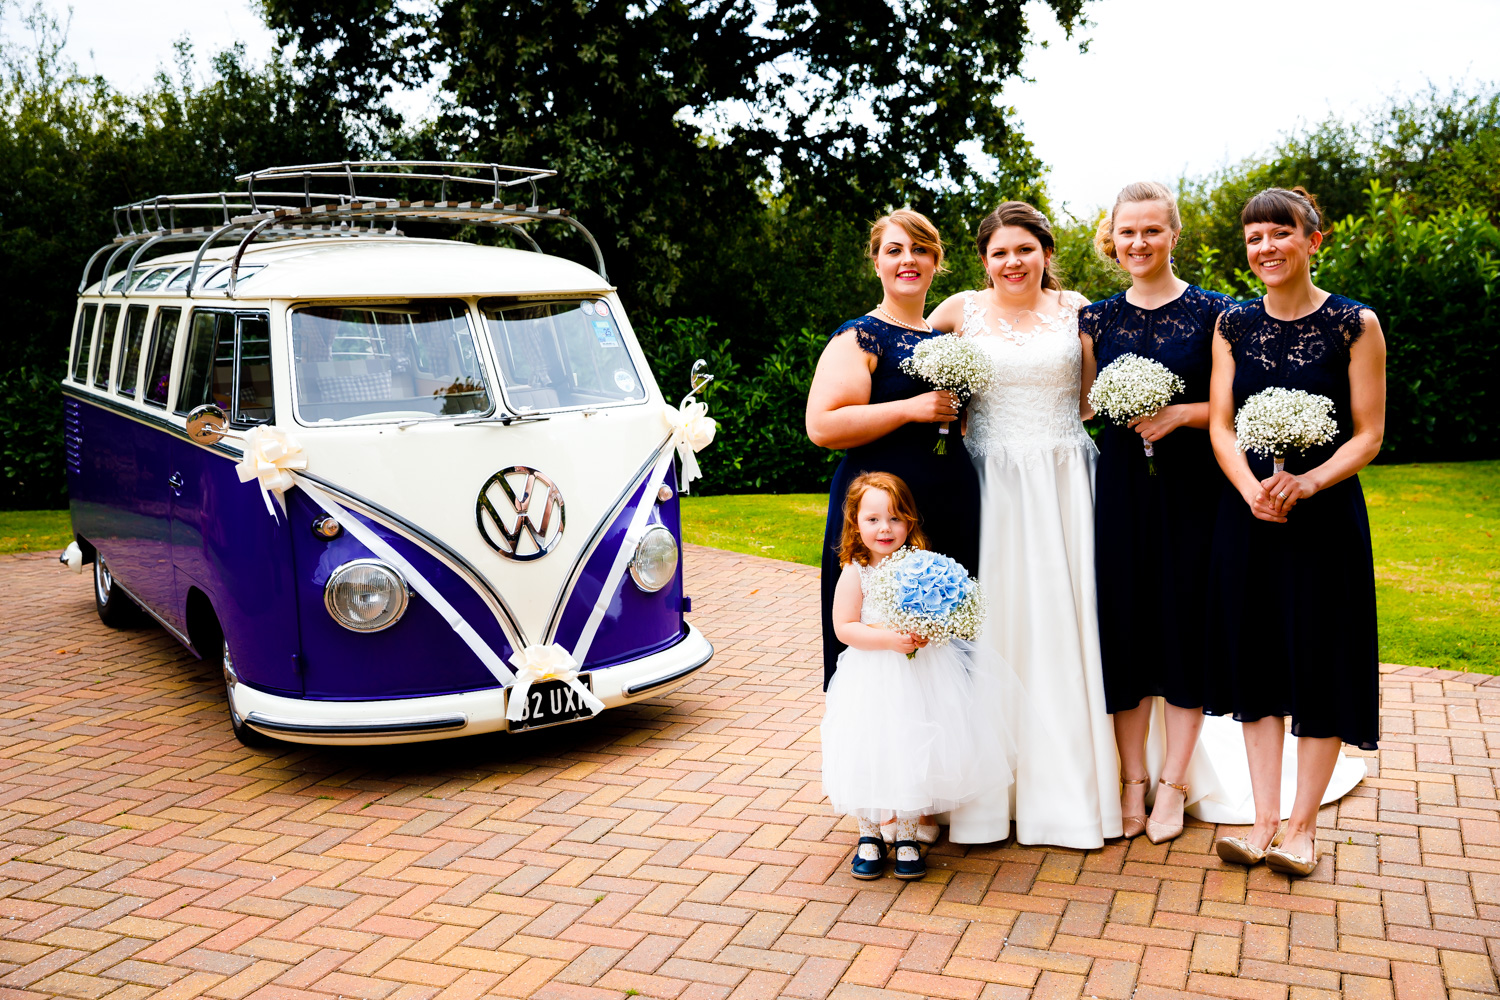 Photos of Danielle and her bridesmaids next to the VW campervan